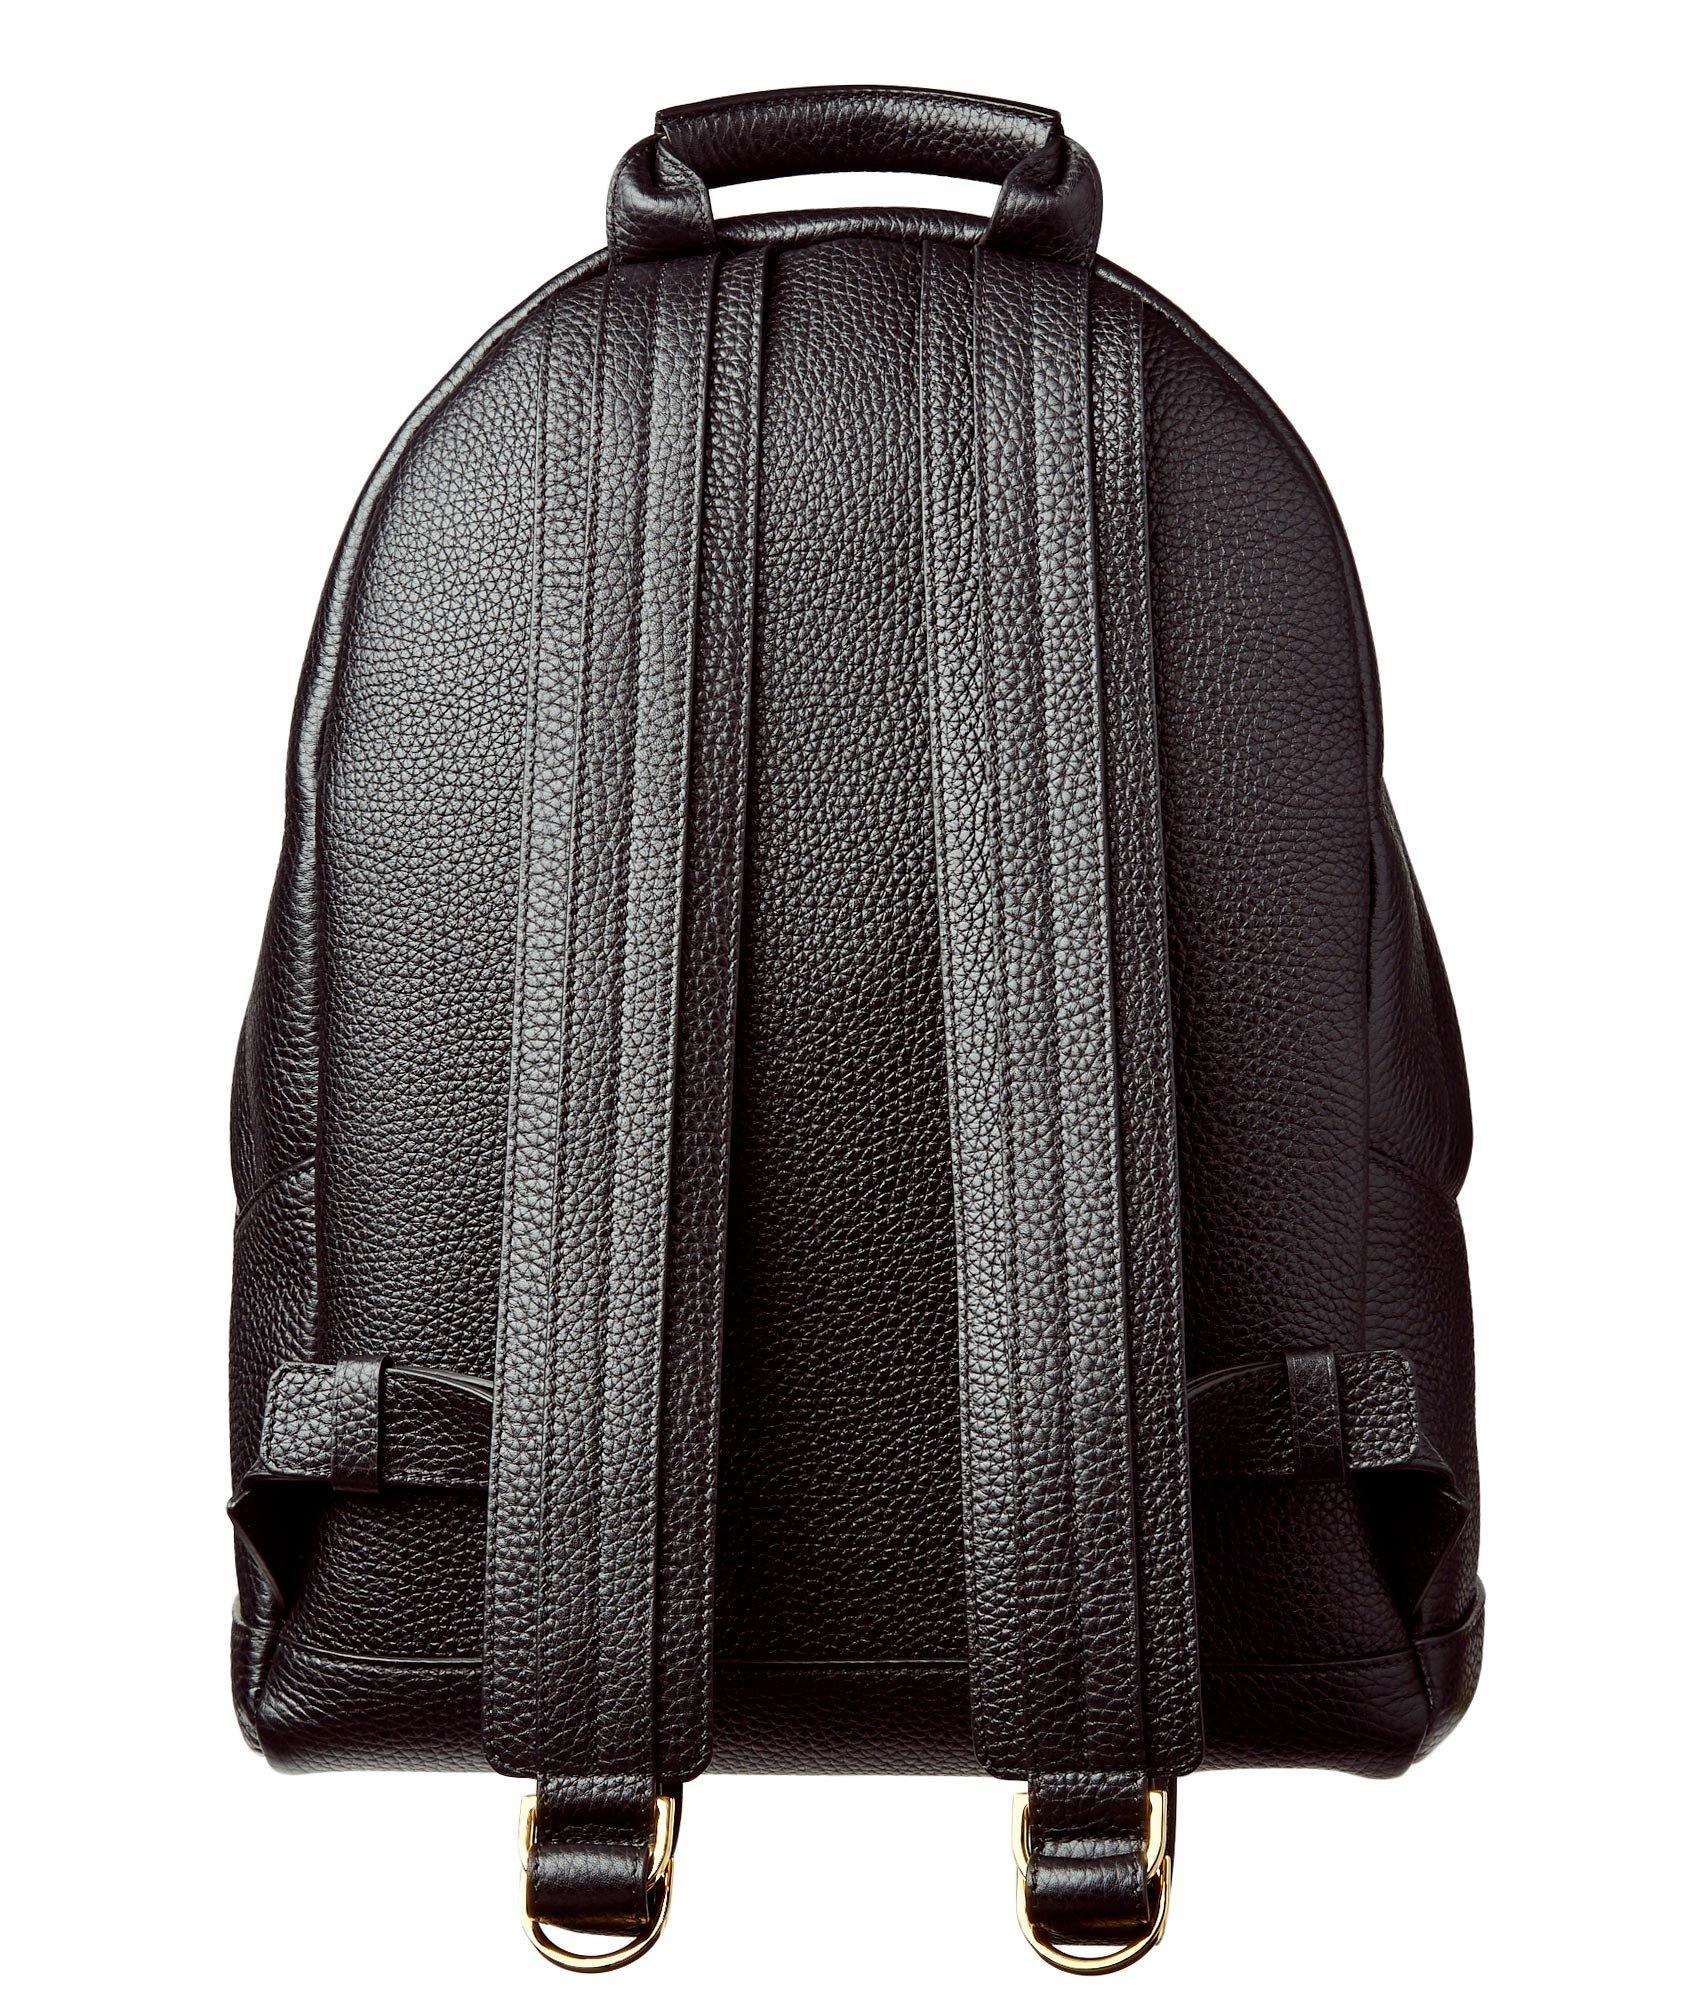 Buckley Leather Backpack image 1